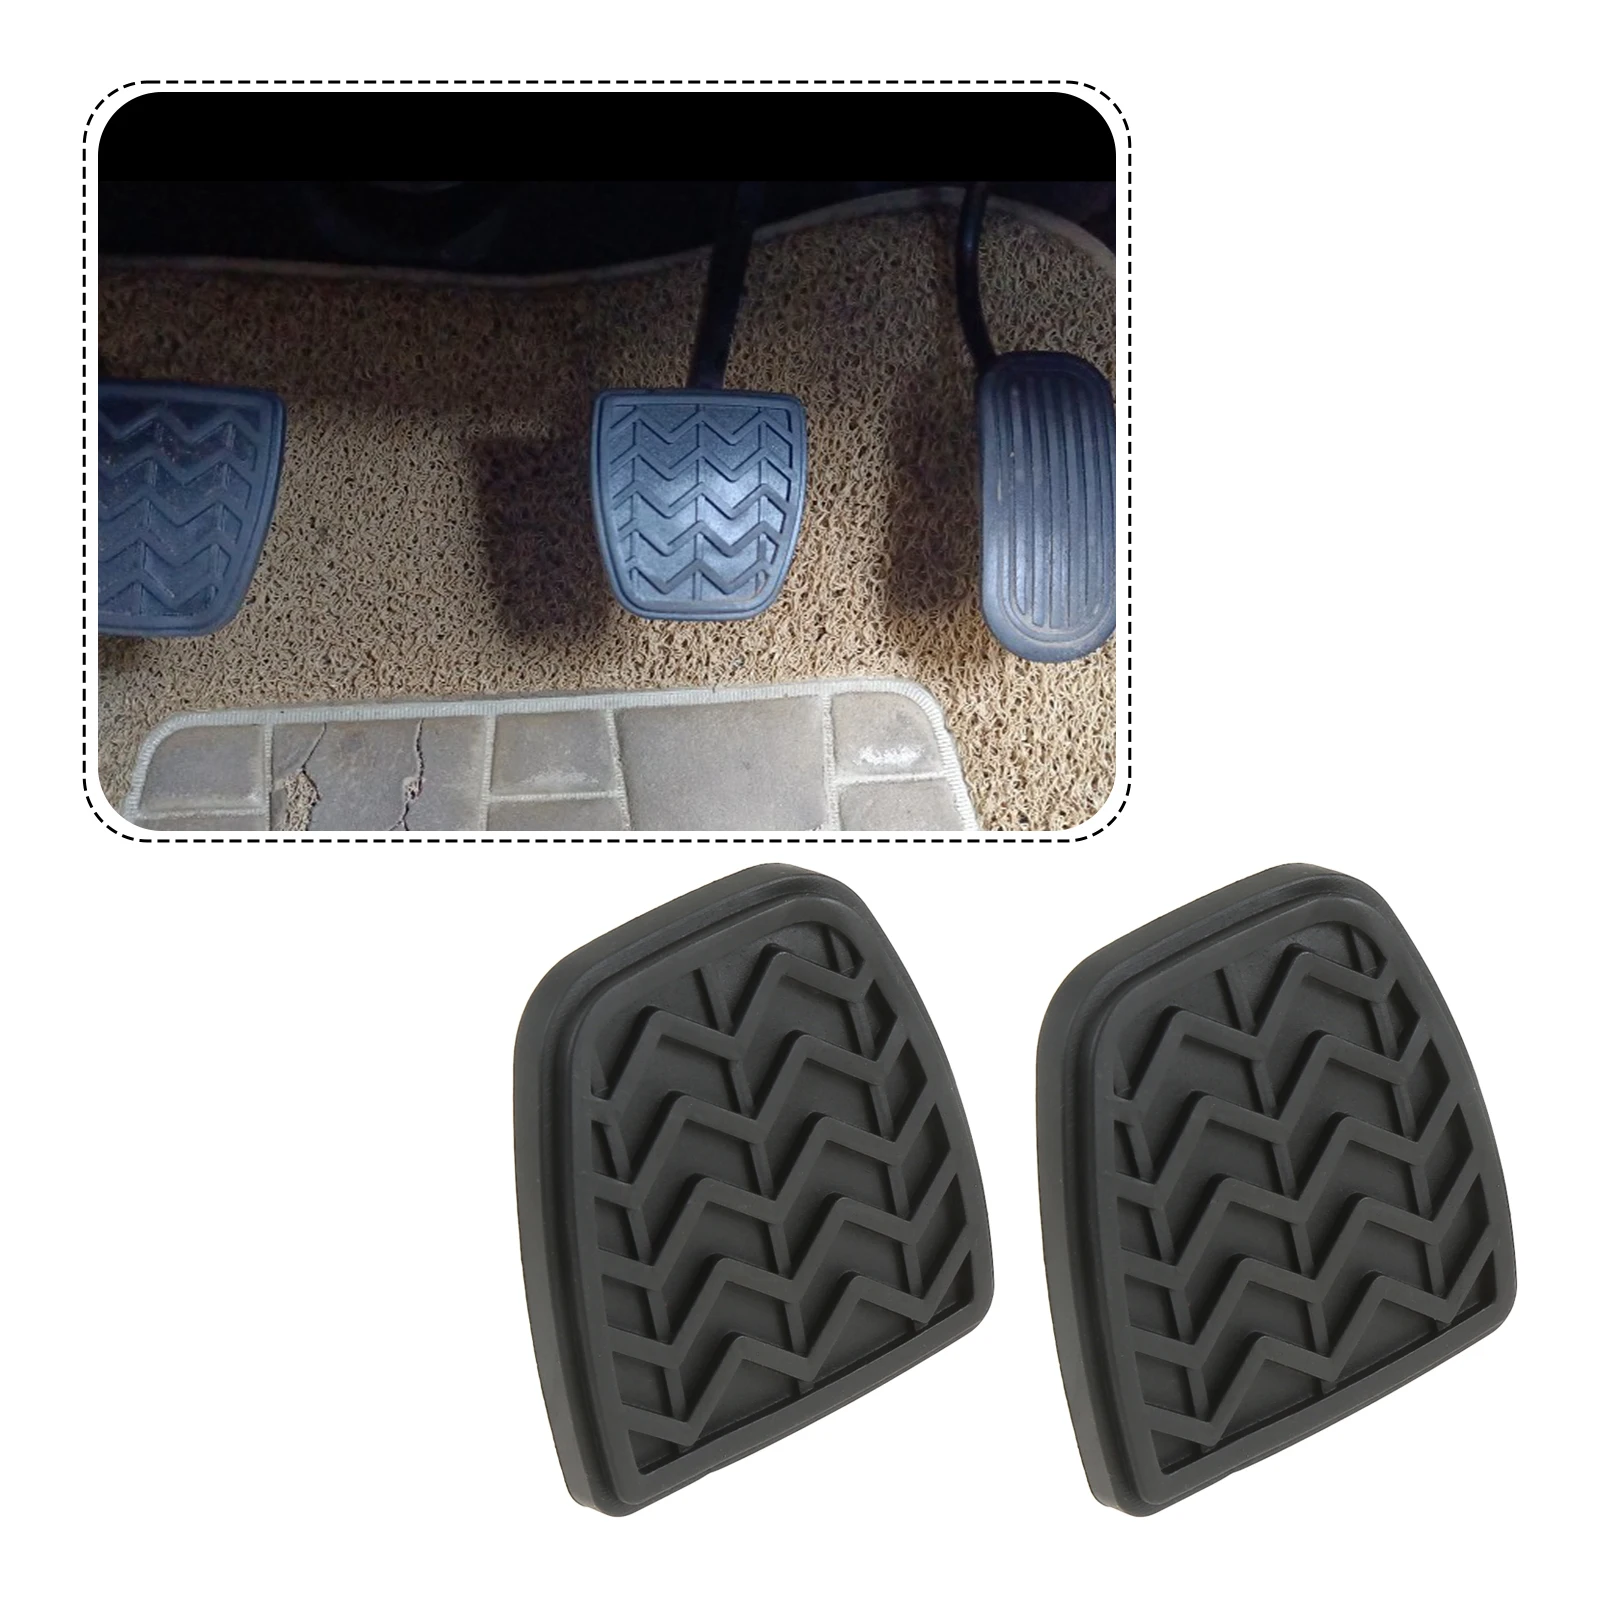 Pcs black rubber brake clutch pedal pad cover for haval h6 m4 toyota 3504122 s08 rubber thumb200